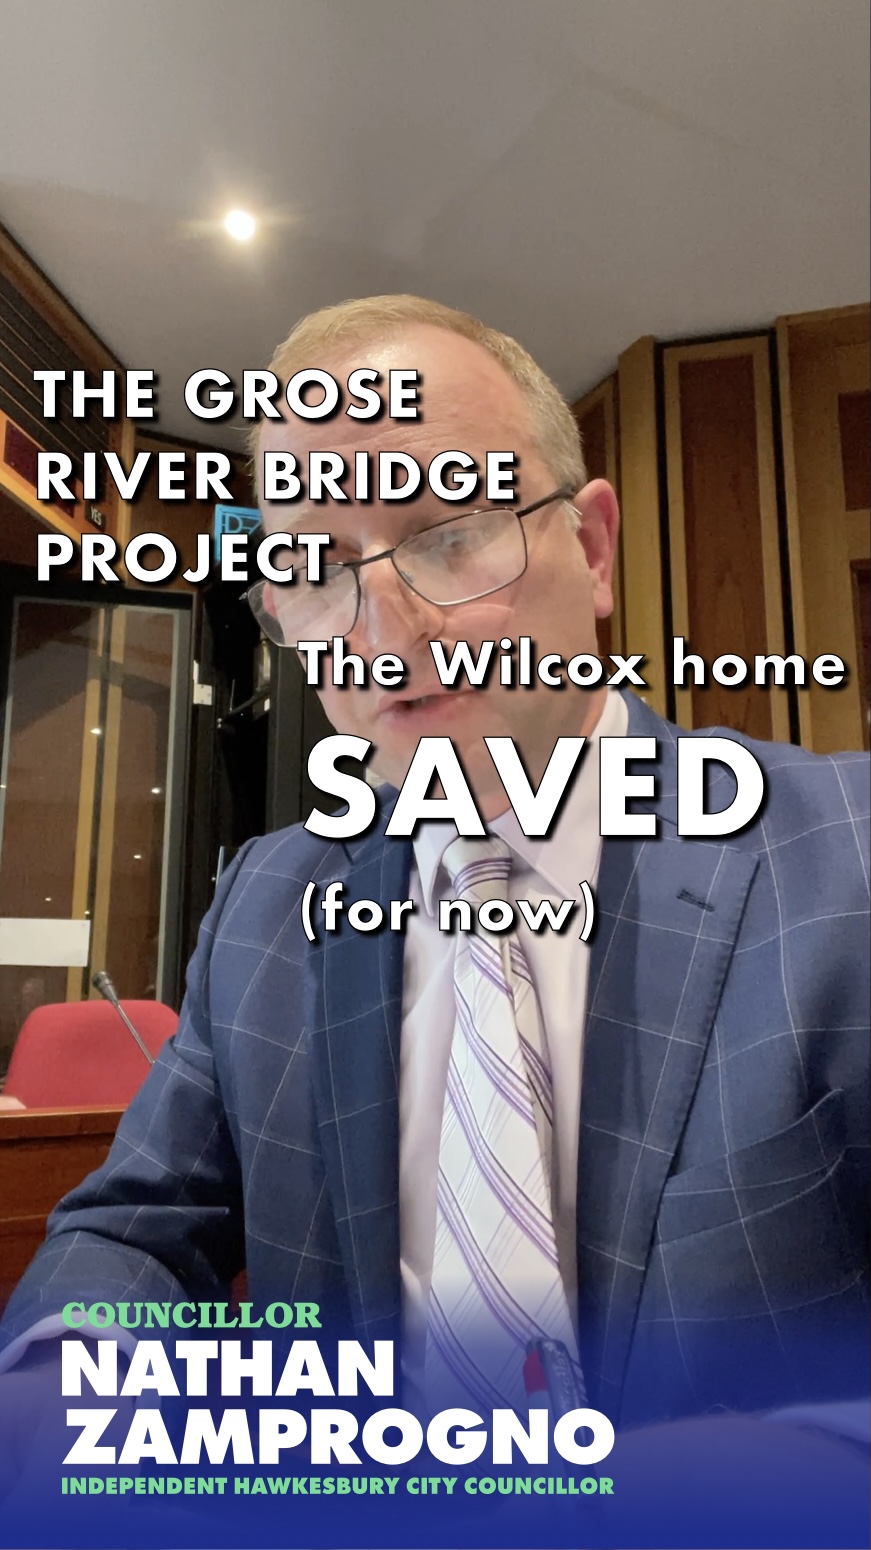 Update on the Grose River Bridge project – the Wilcox Home saved – for now